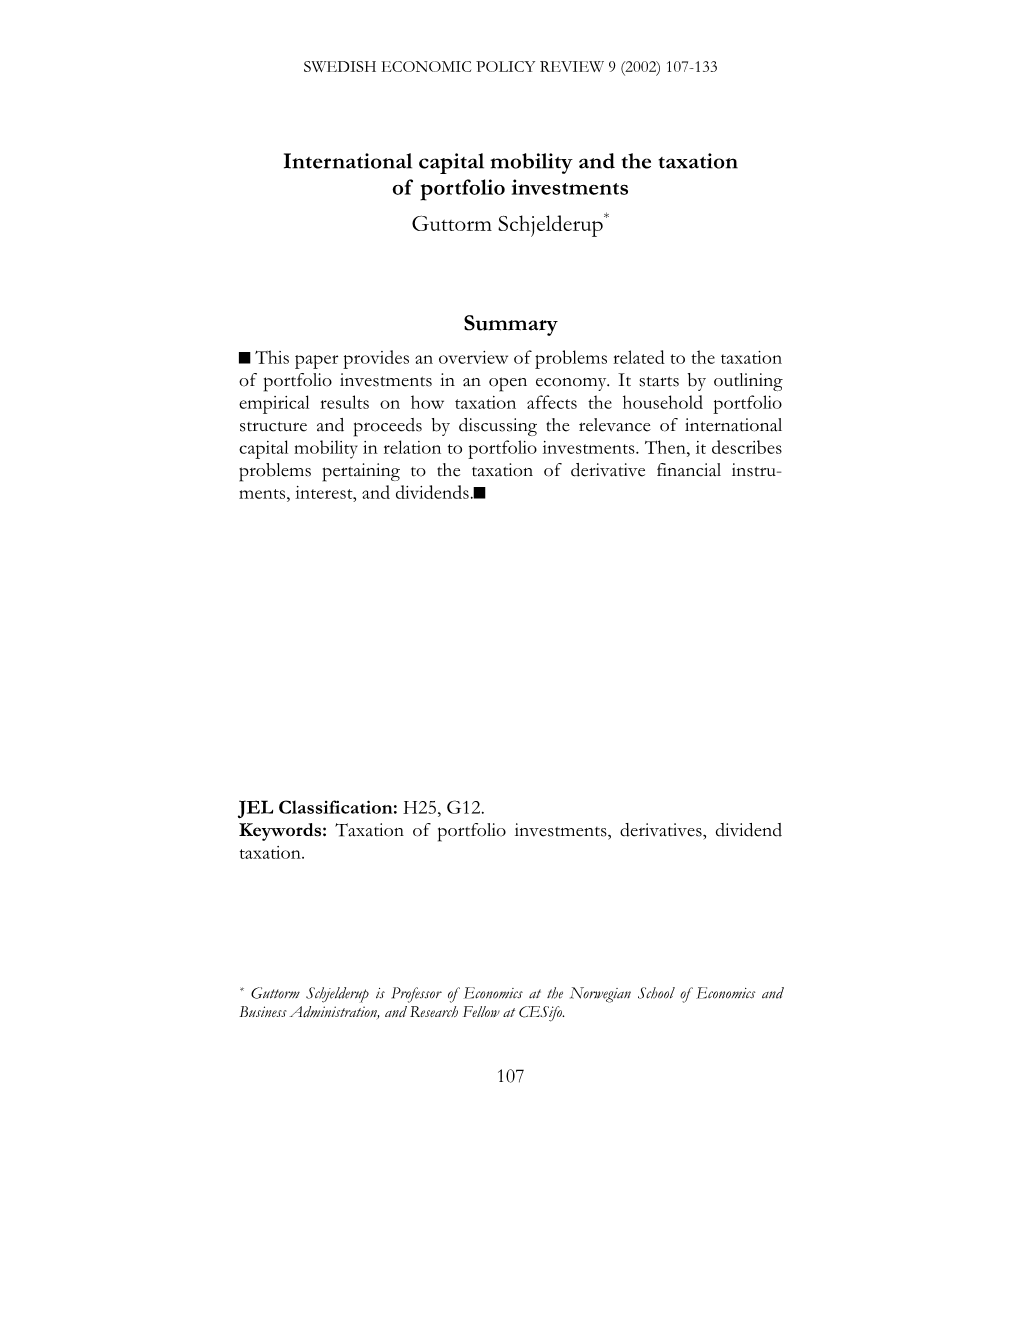 International Capital Mobility and the Taxation of Portfolio Investments Guttorm Schjelderup*